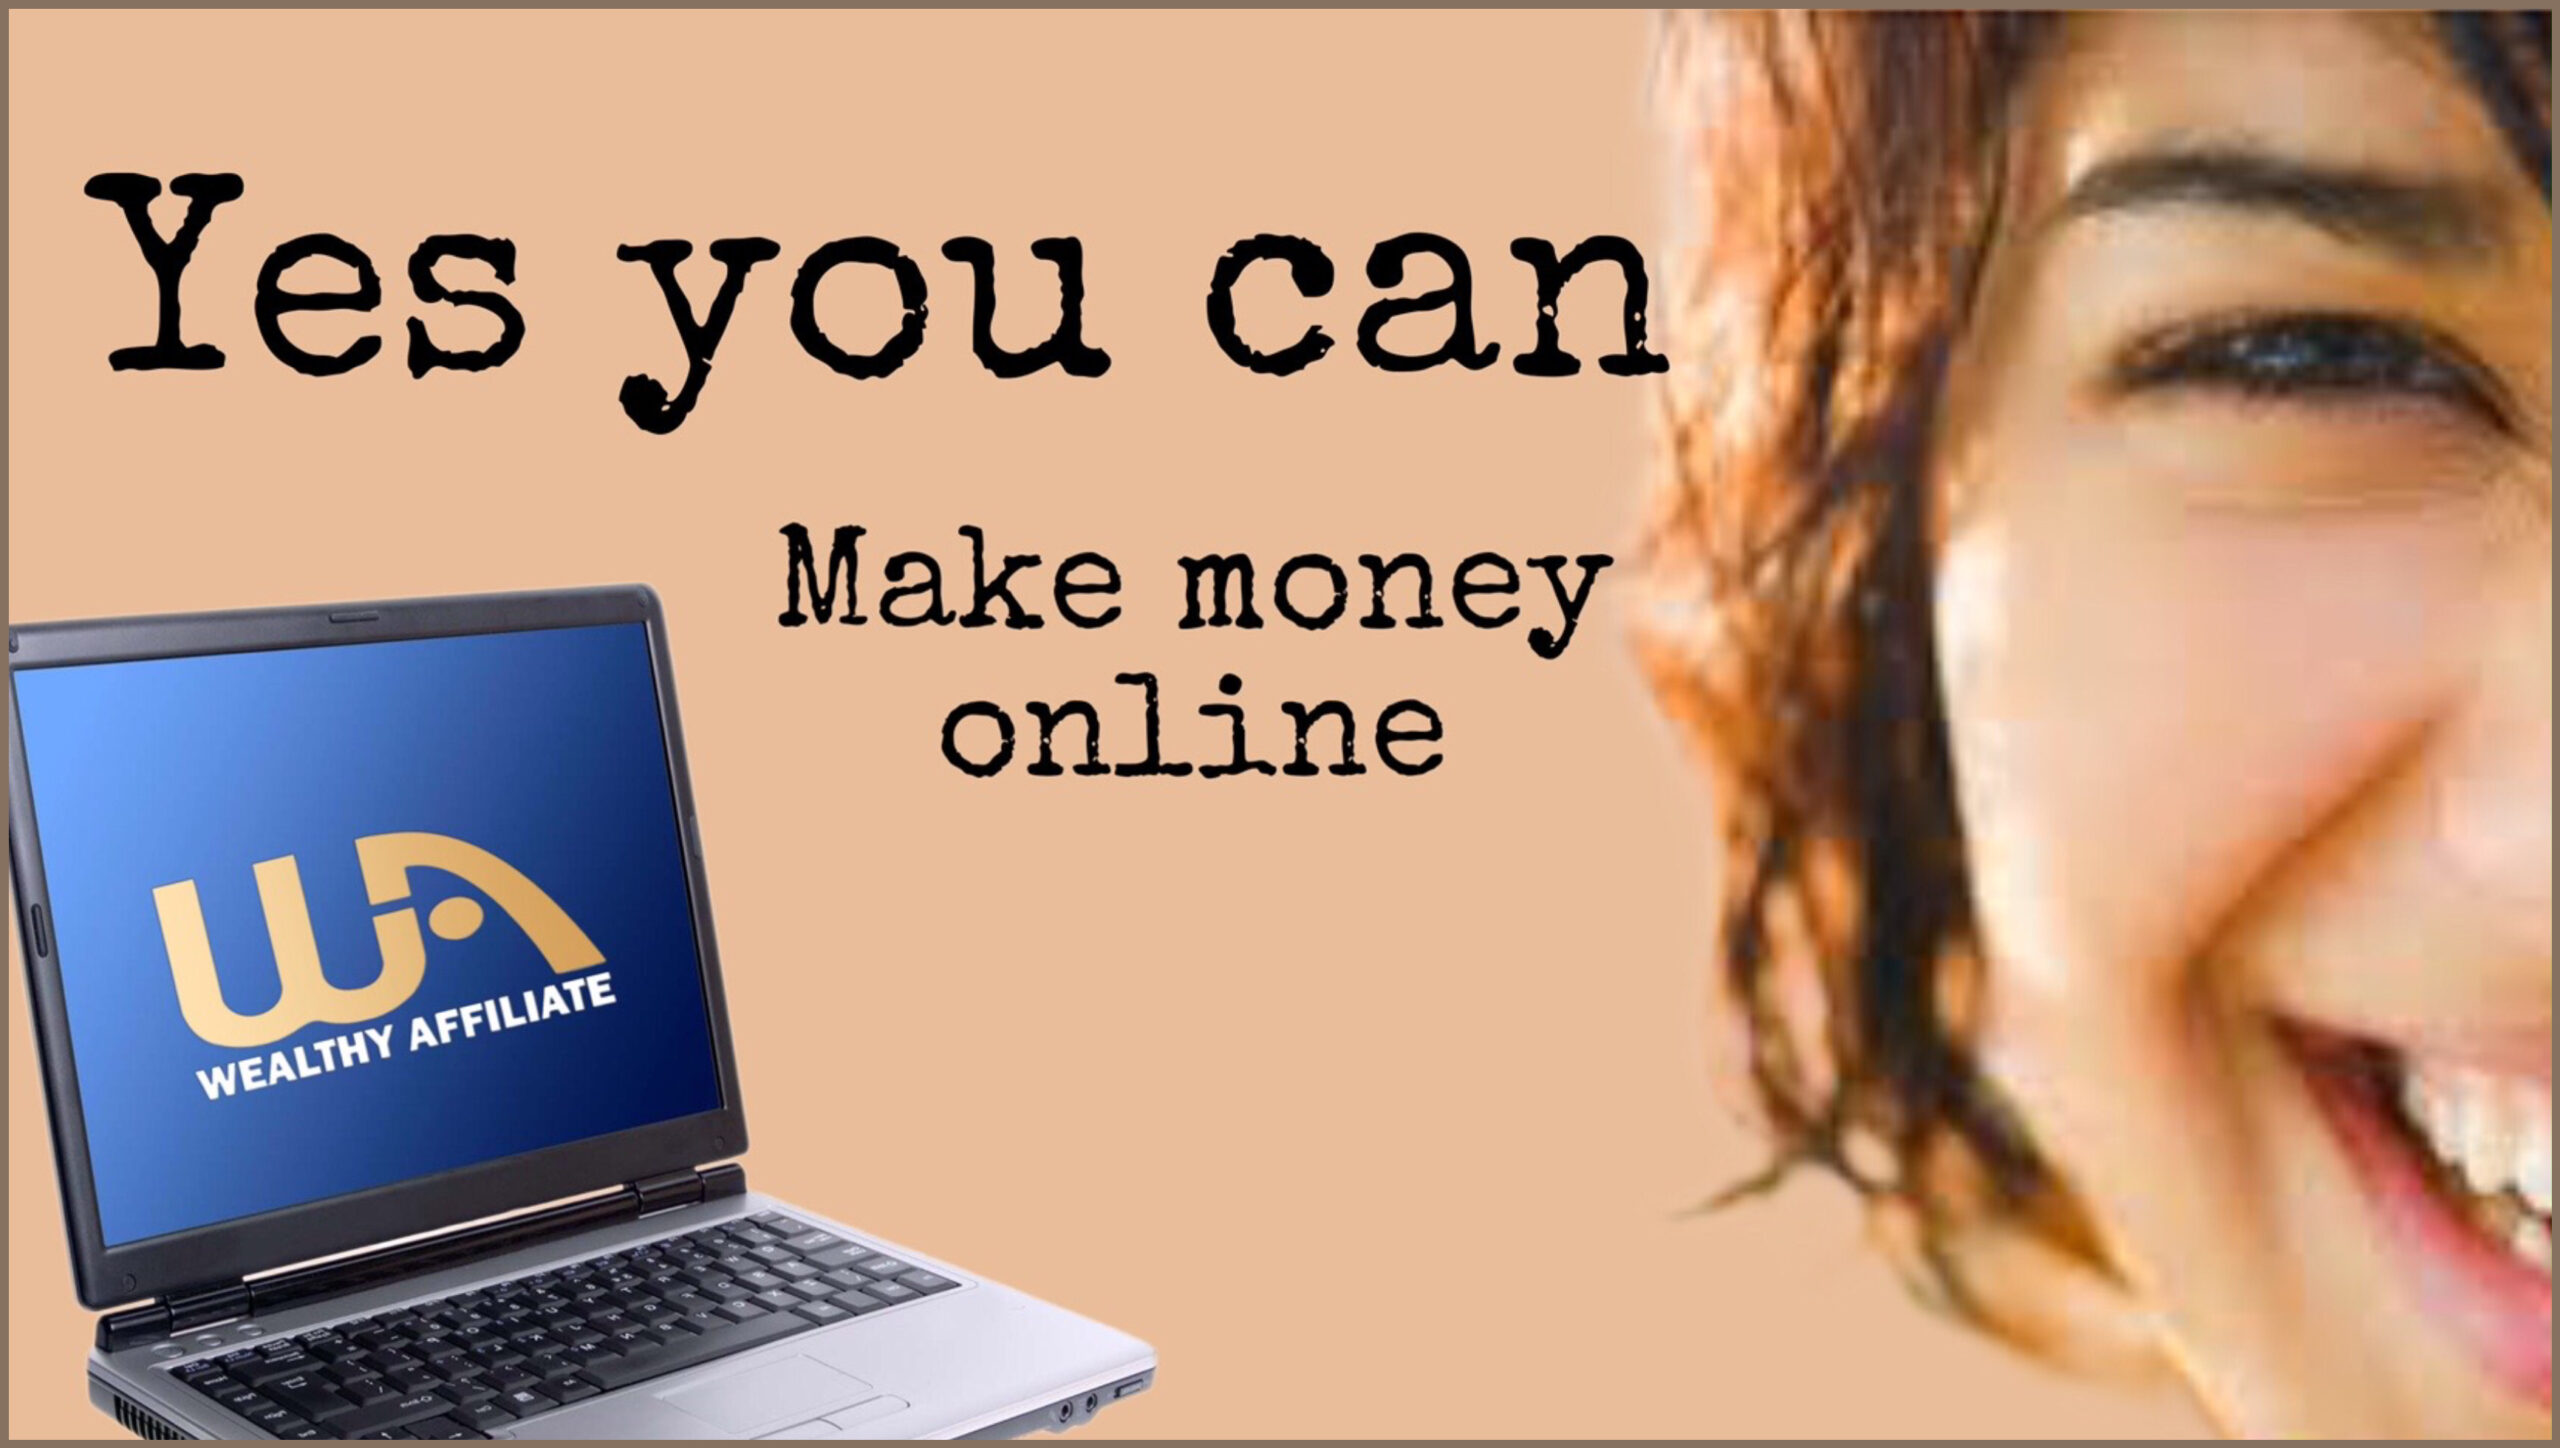 You can make money online